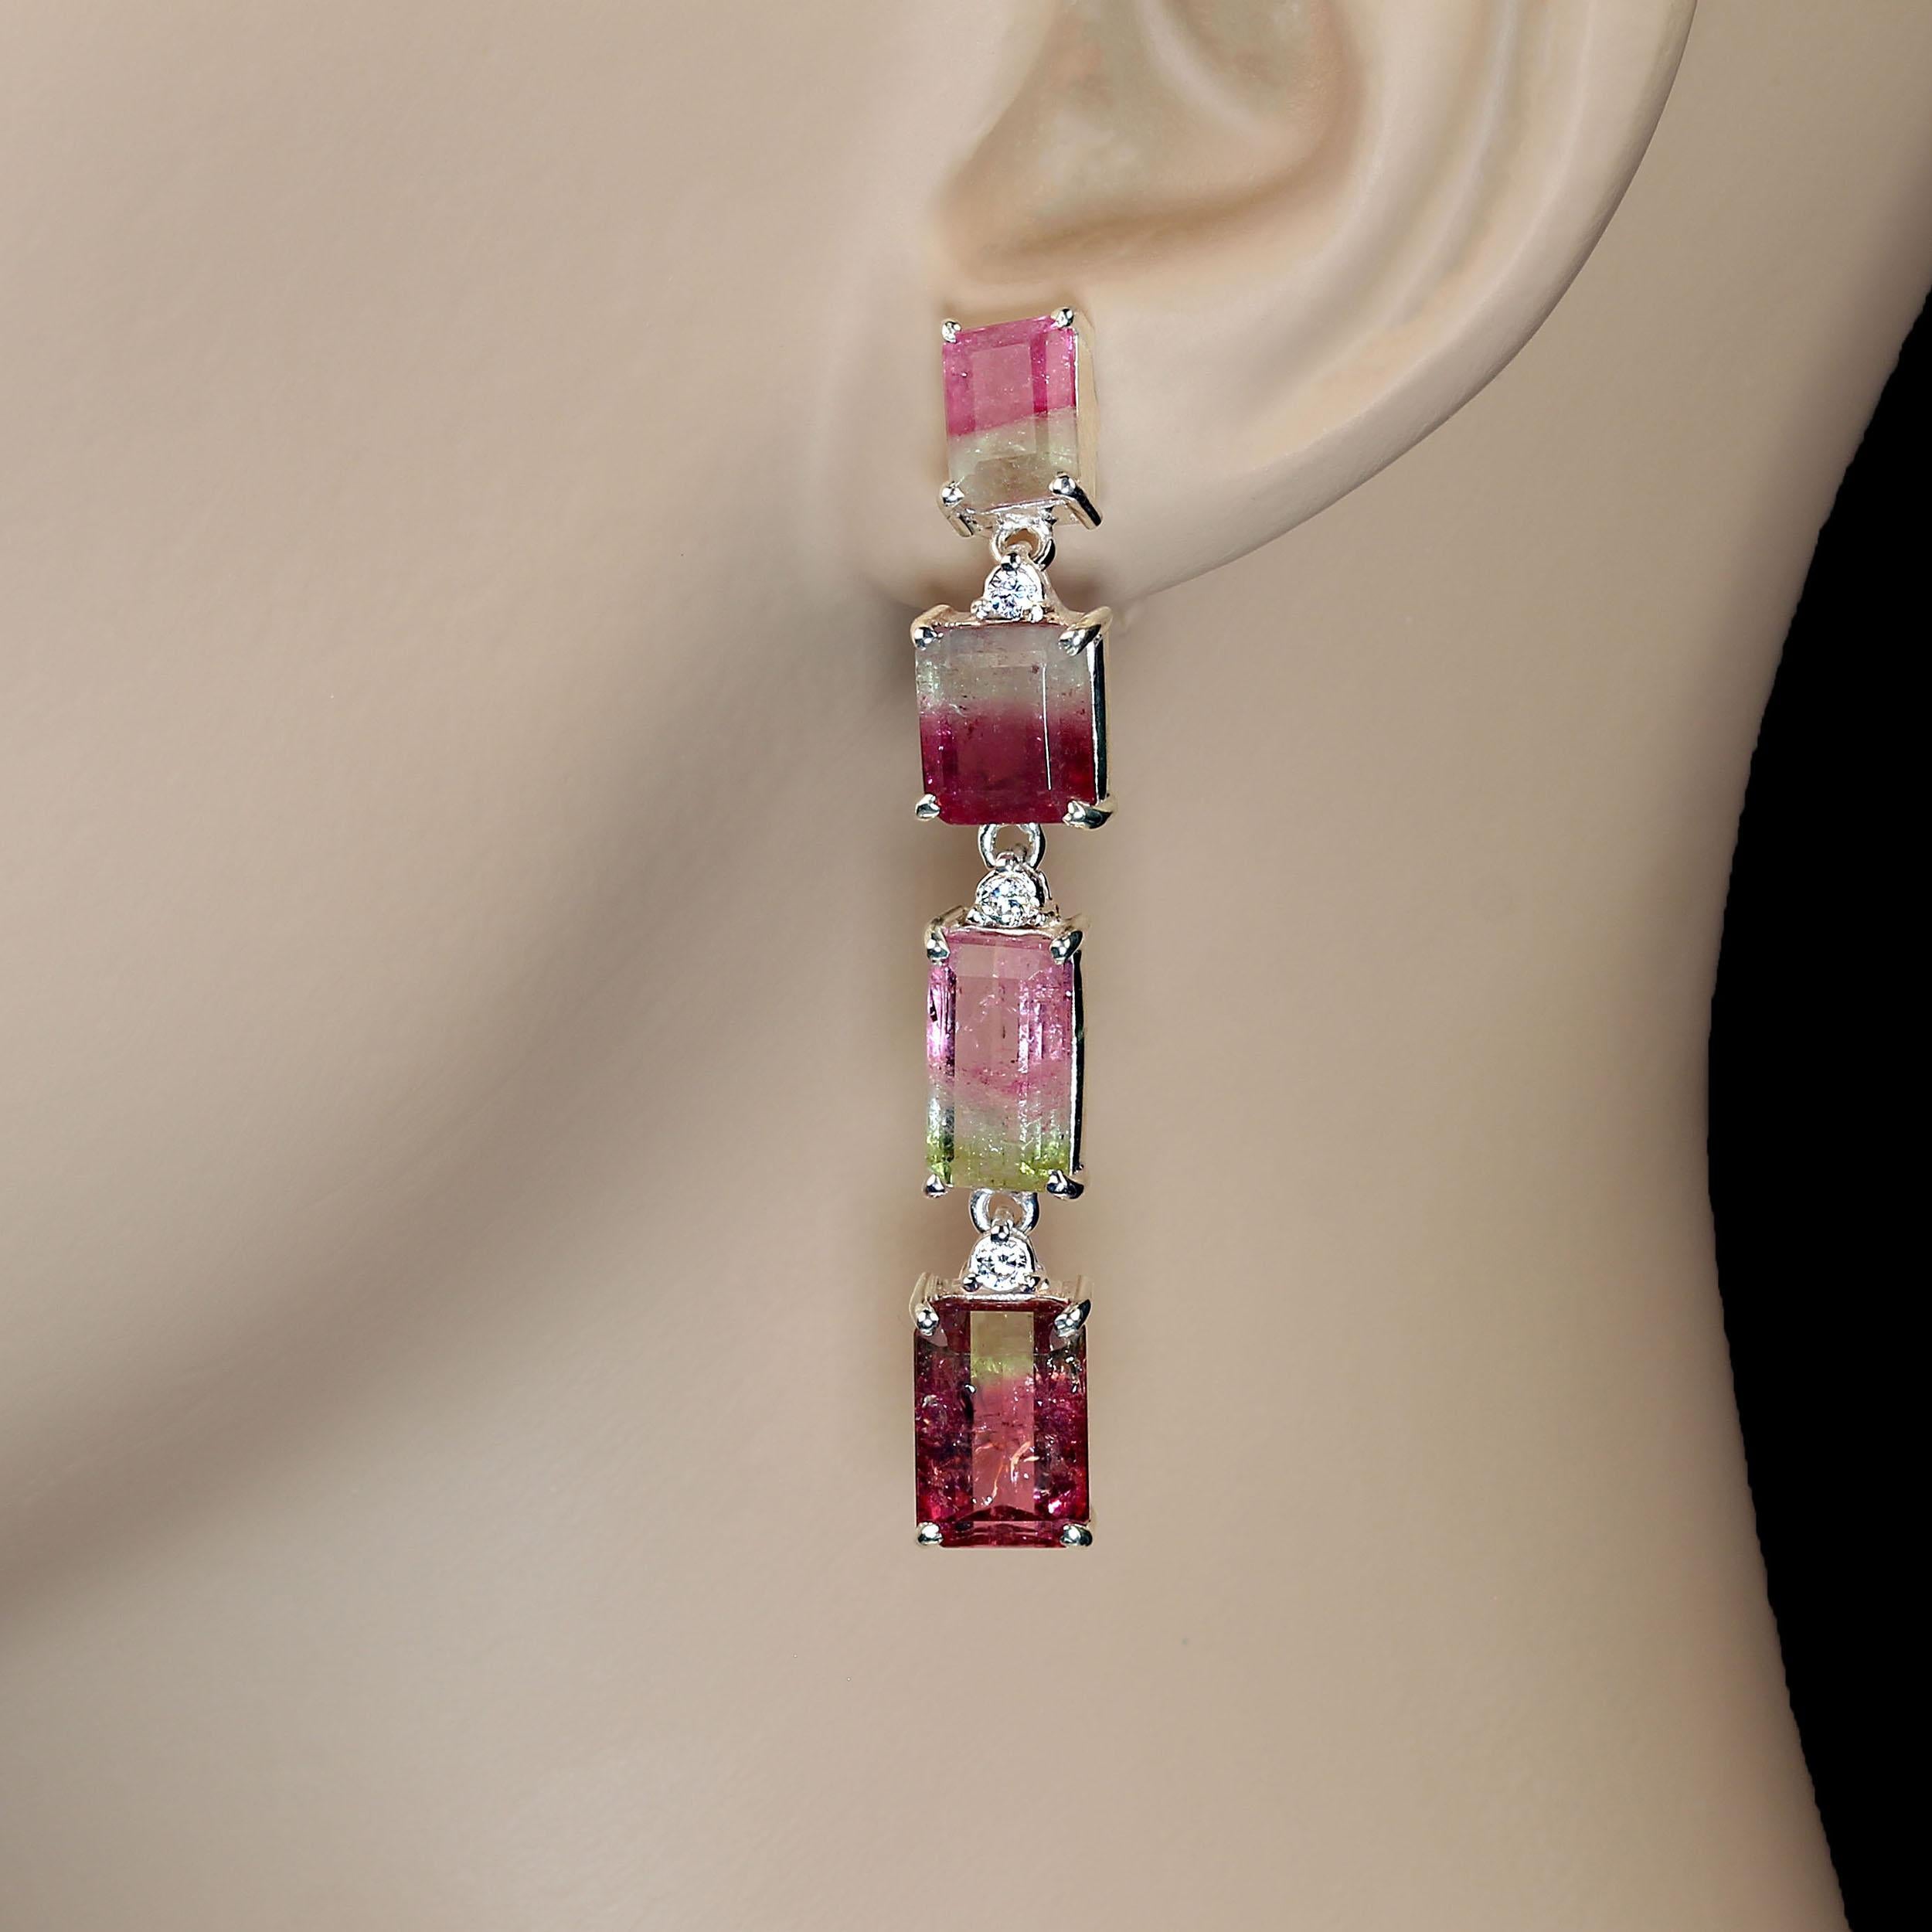 One of a kind Bi-Color Tourmaline Earrings in long swinging lines. These pink and green emerald cut Tourmalines each have their own character. One earring is closer to 2 inches in length, the other about 1.75 inches. Each Tourmaline is individually